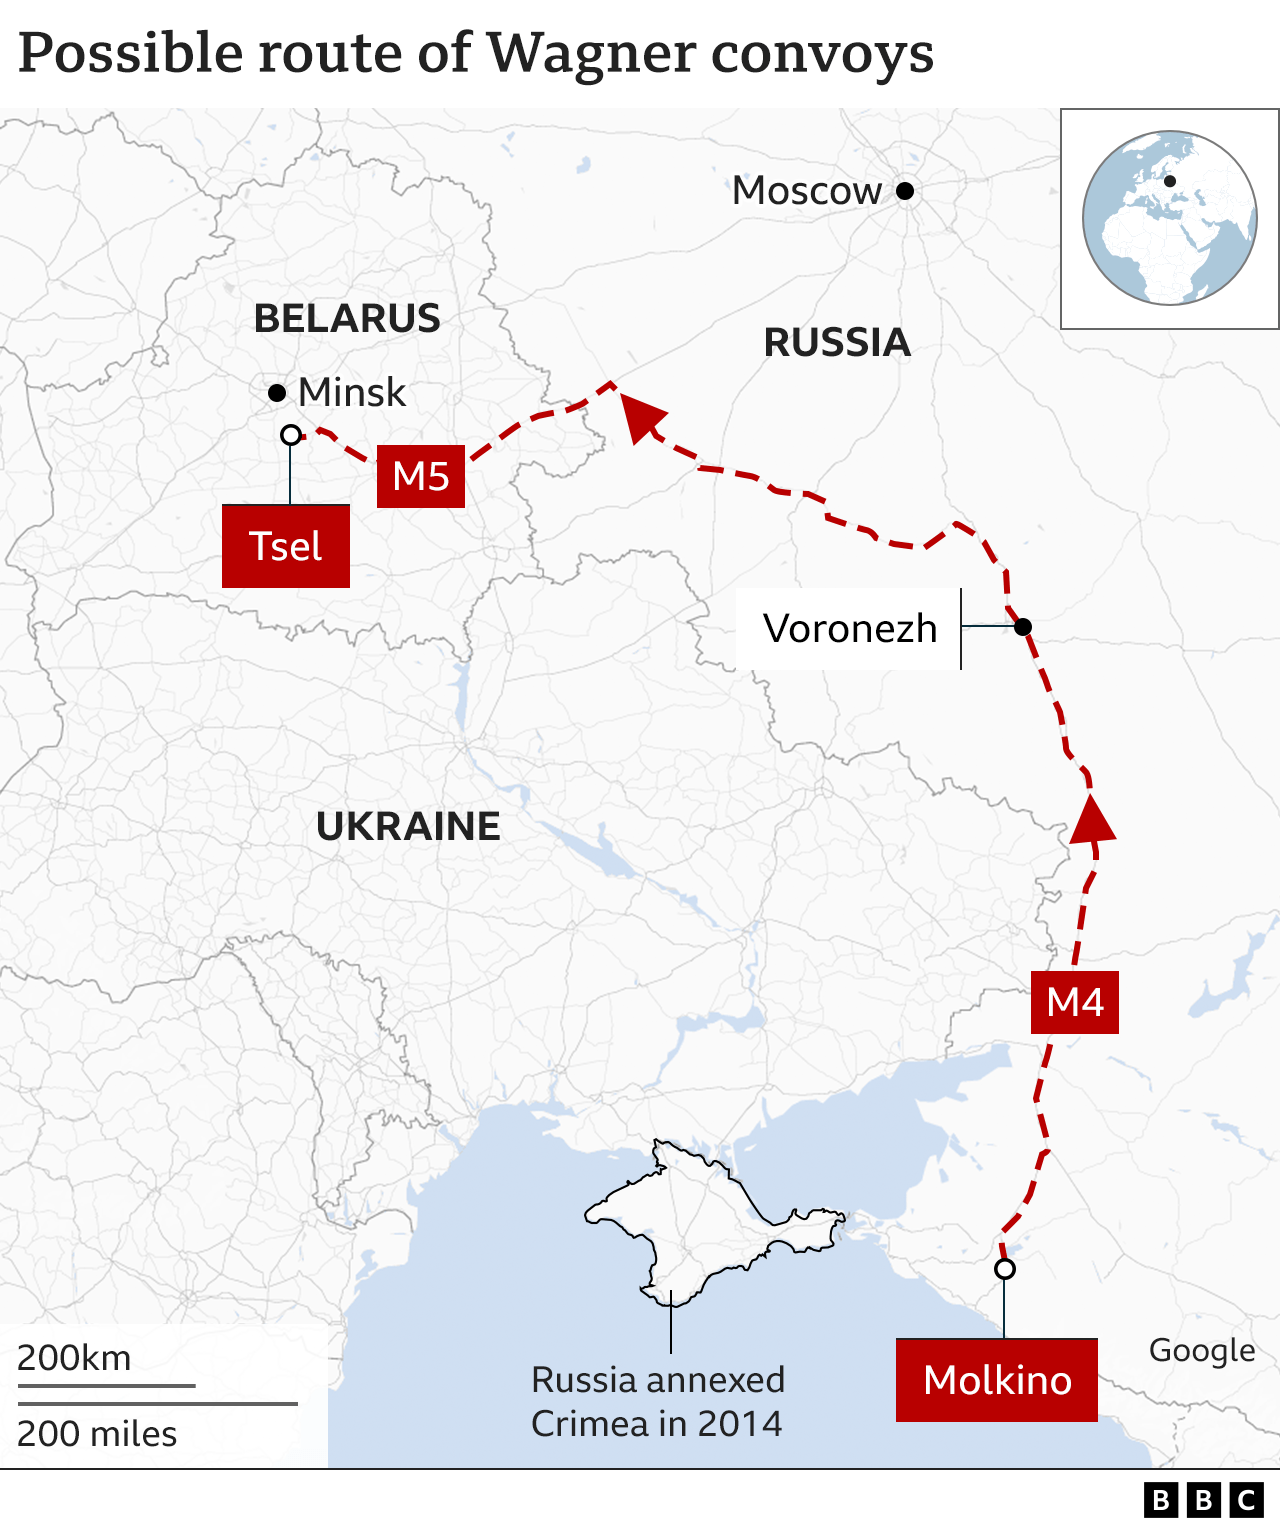 Map showing possible Wagner convoy route from Molkino in Russia to Tsel in Belarus